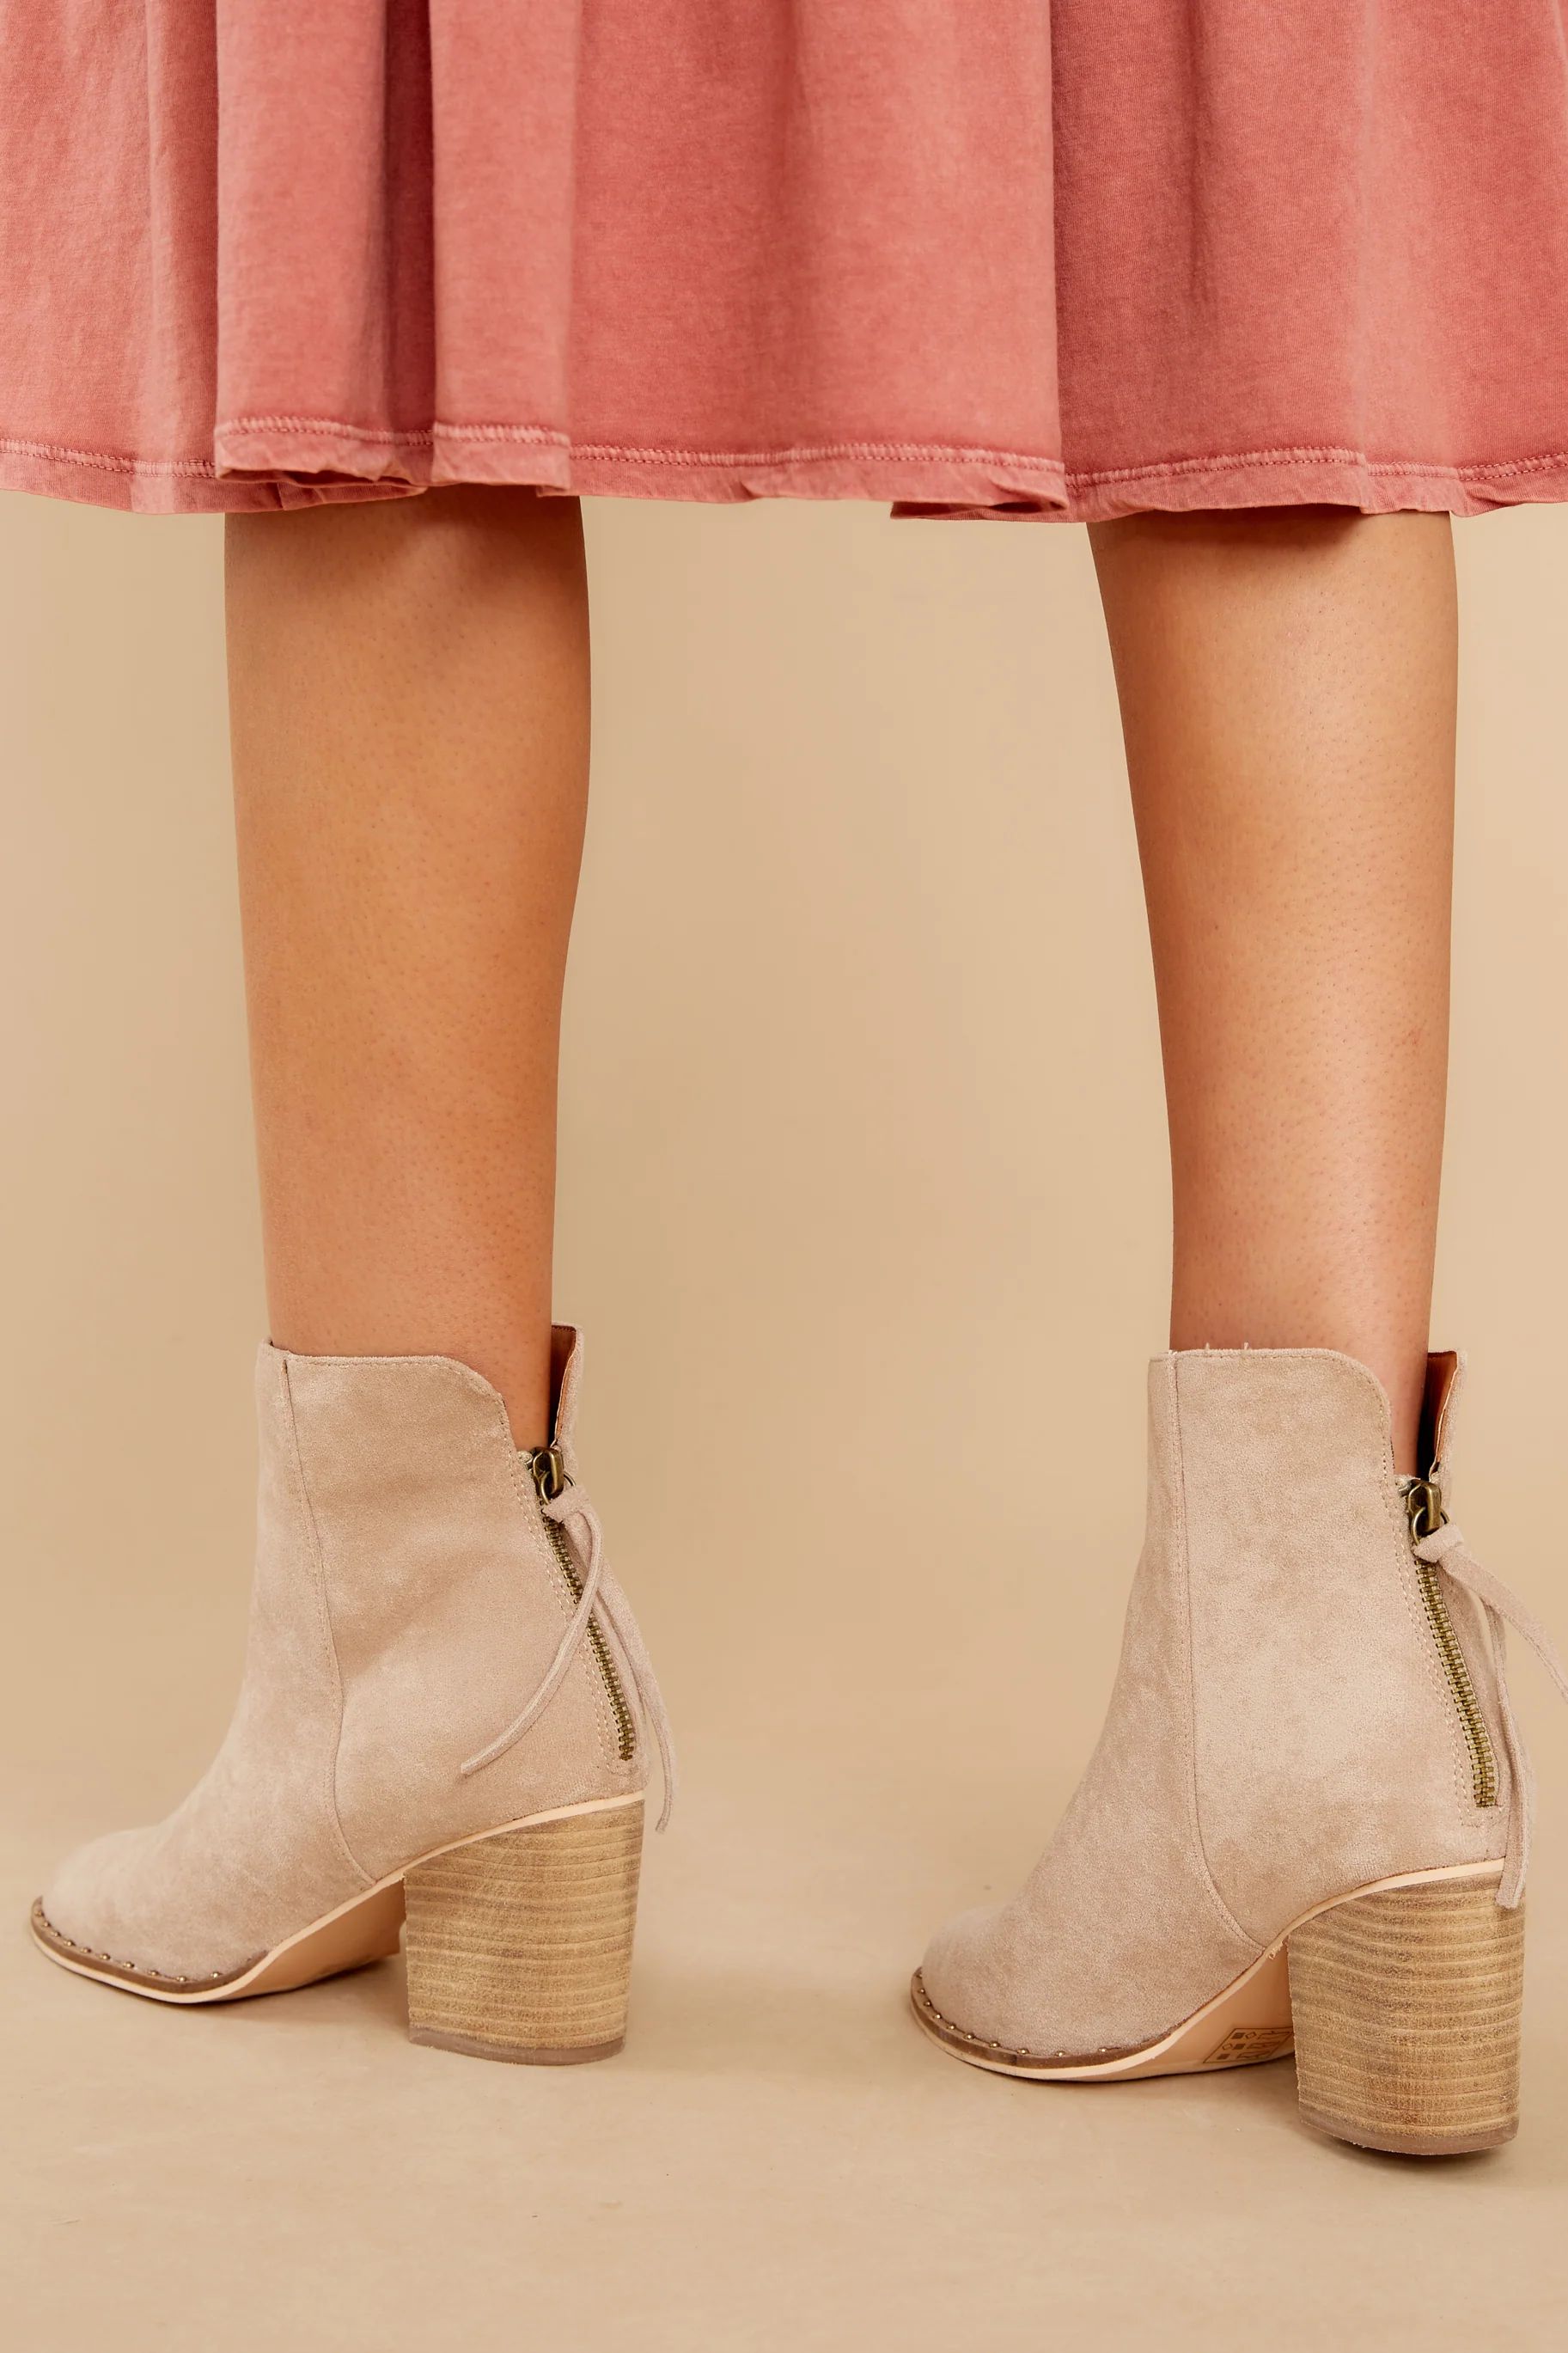 Taking These With Me Light Taupe Ankle Booties | Red Dress 